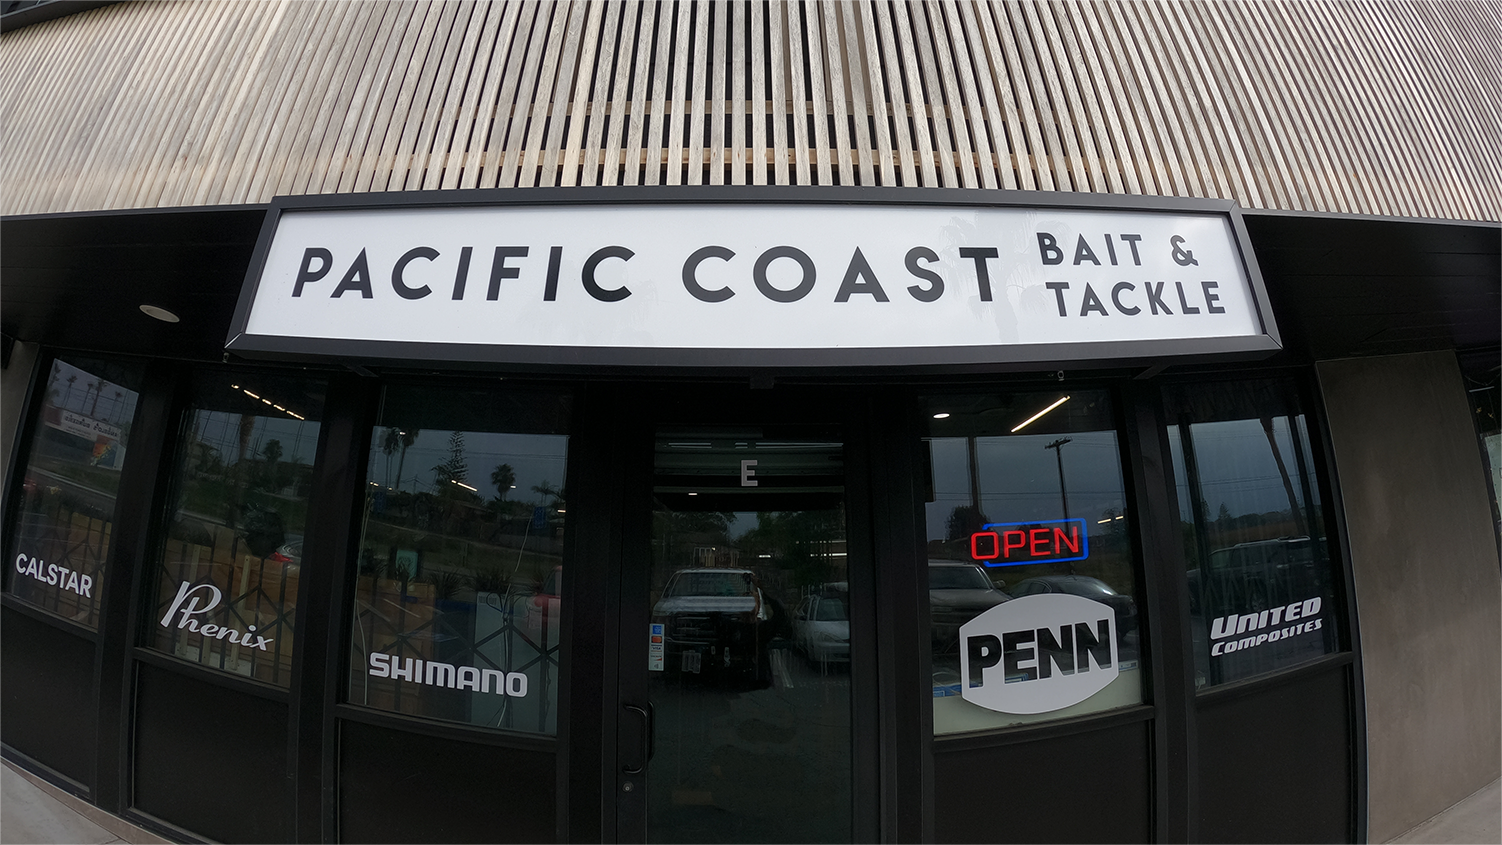 Load video: Take a tour of Pacific Coast Bait &amp; Tackle